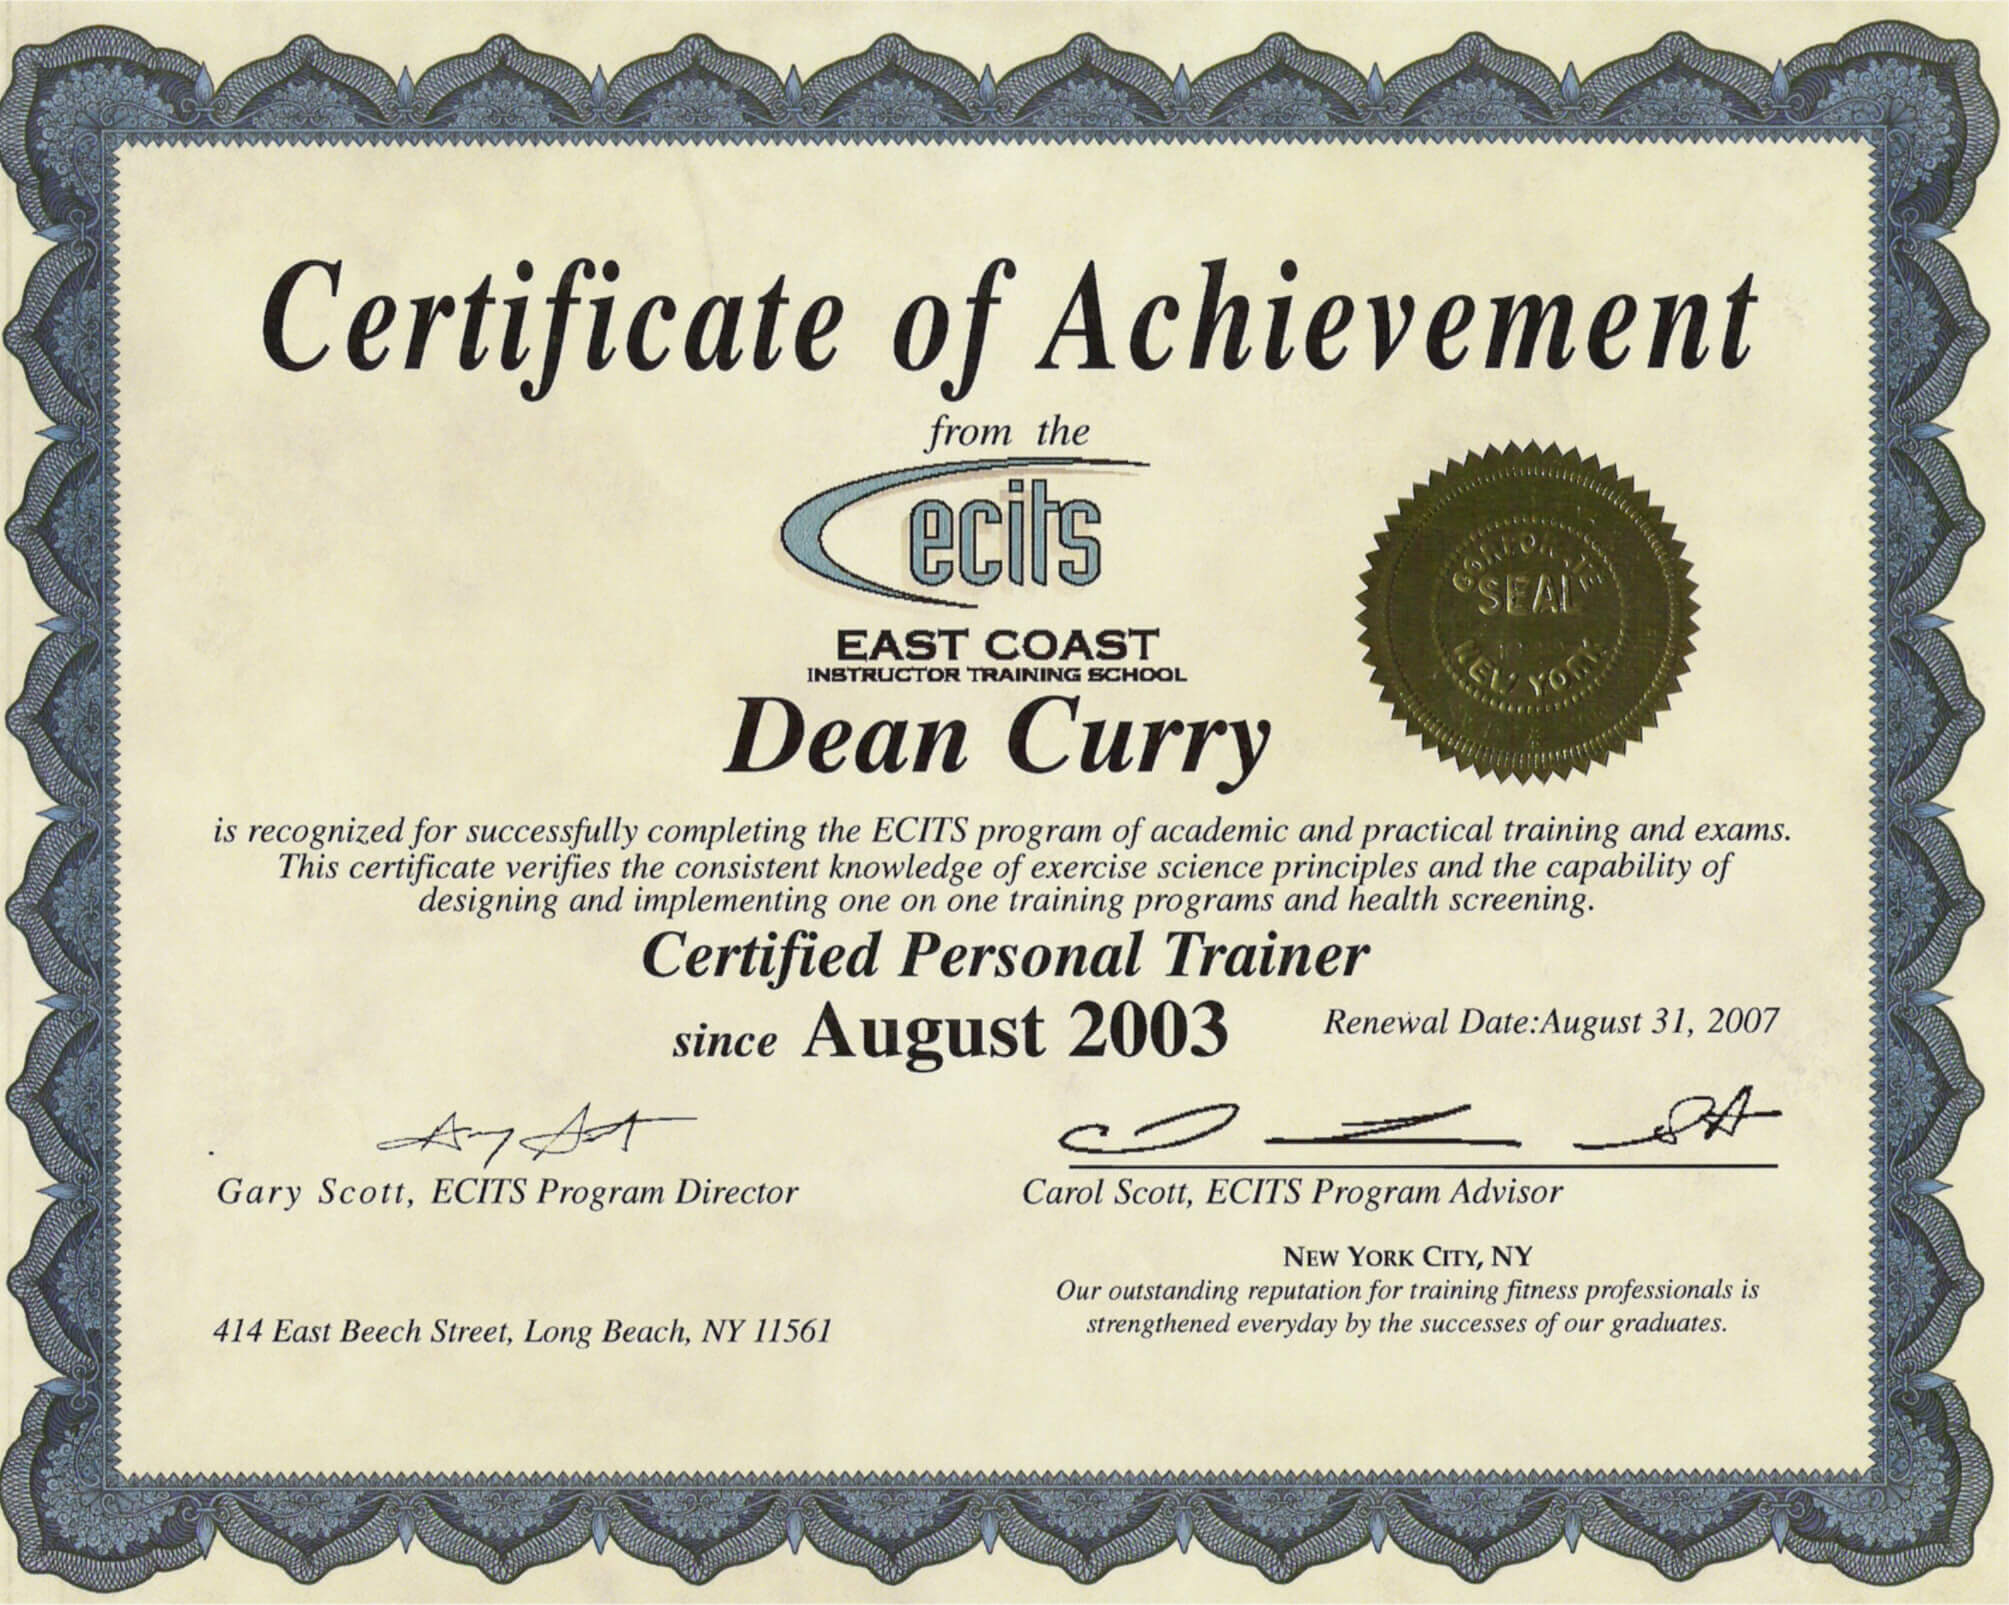 Certificate Of Achievement Army Template ] – Army Throughout Certificate Of Achievement Army Template